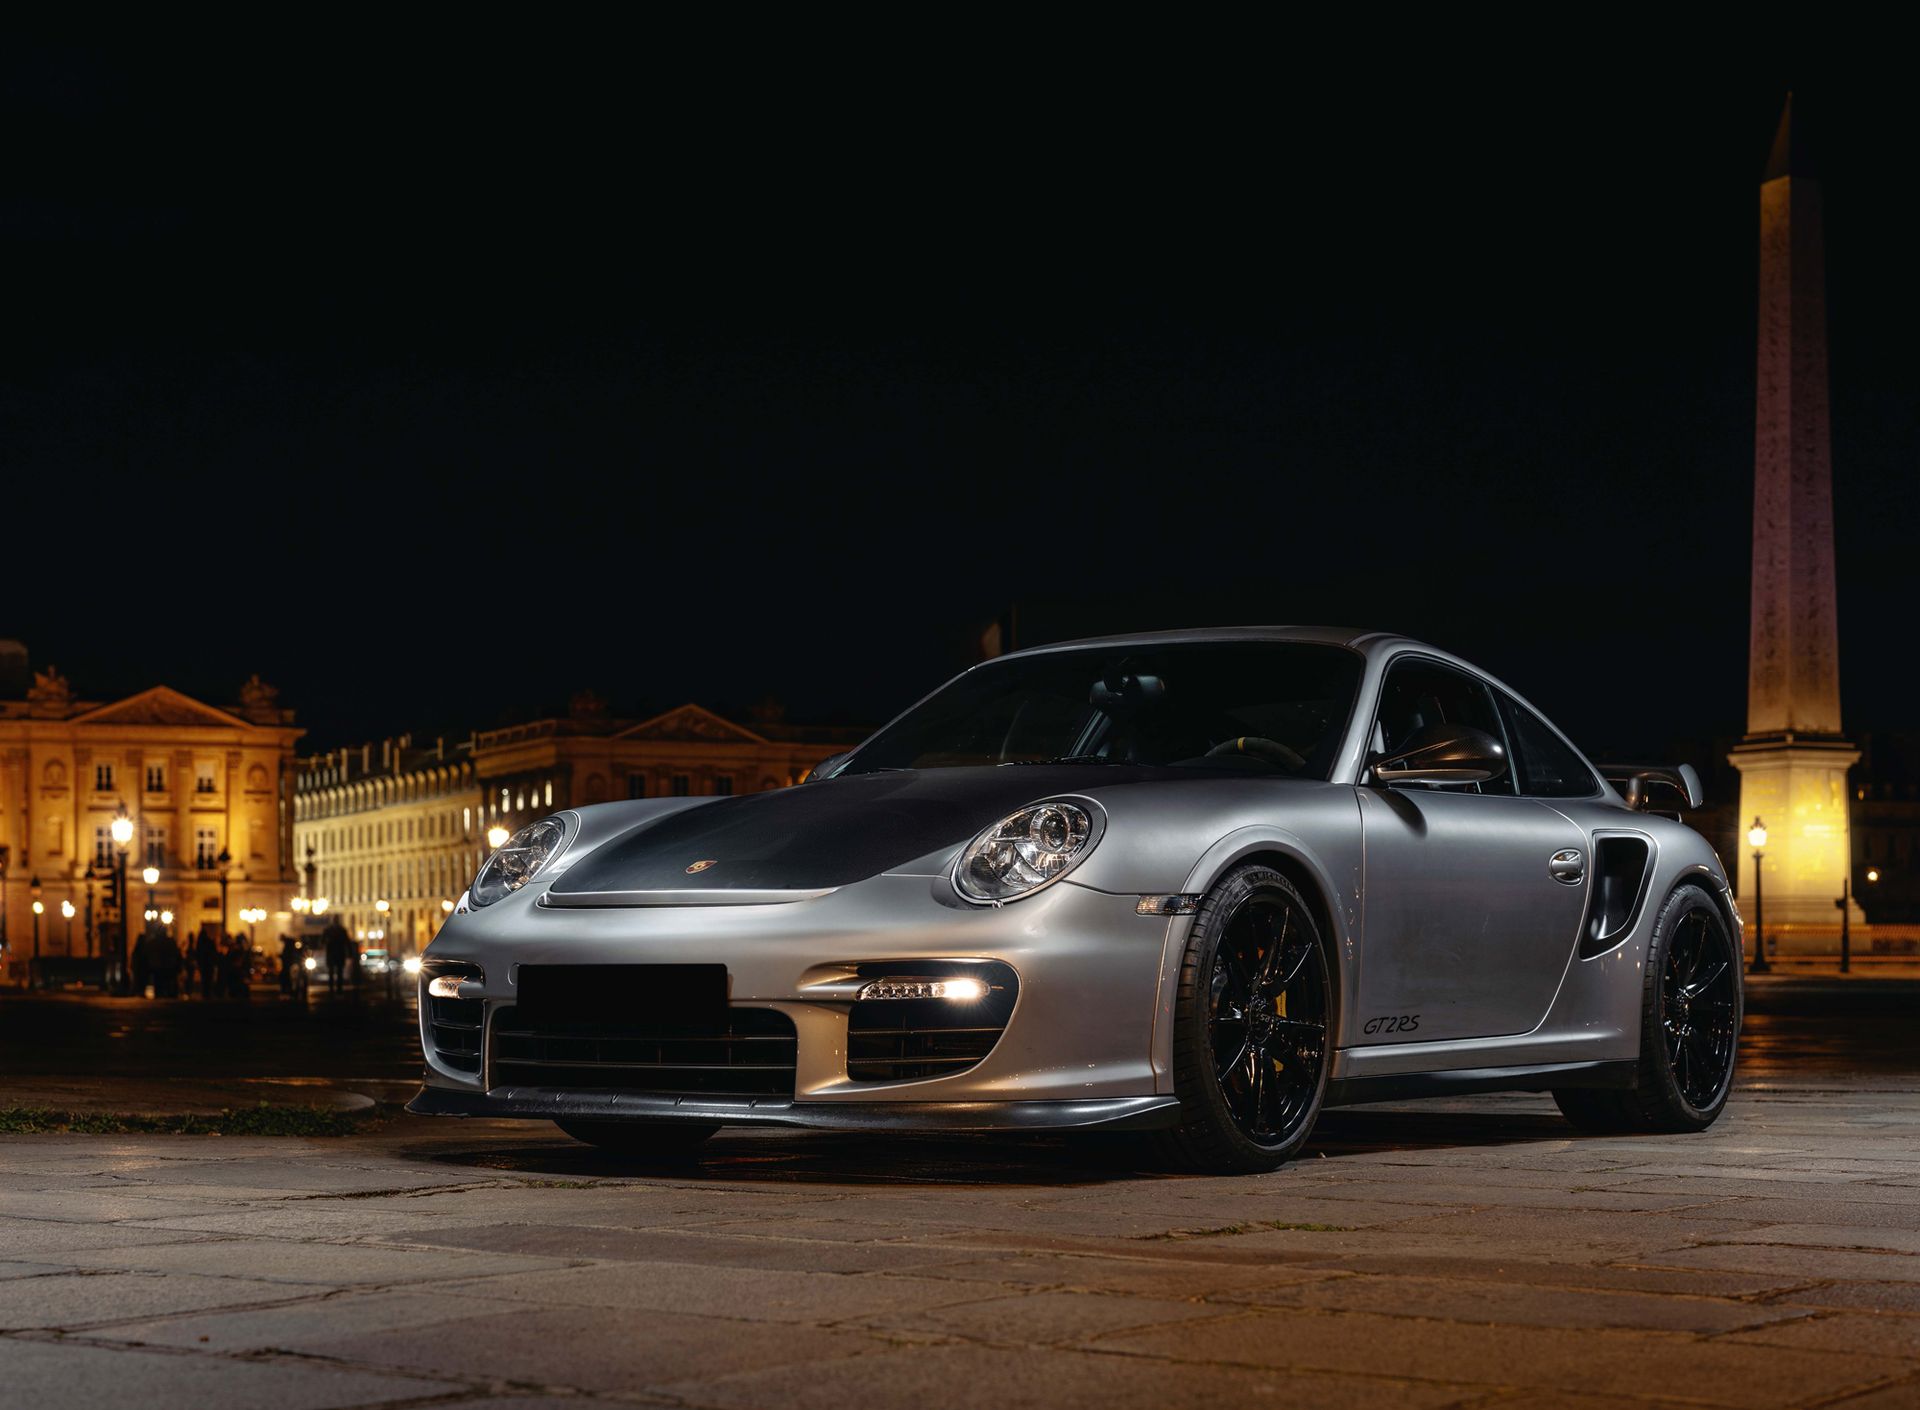 Porsche 997 GT2 RS 2011 French registration title

With just 500 examples produc&hellip;